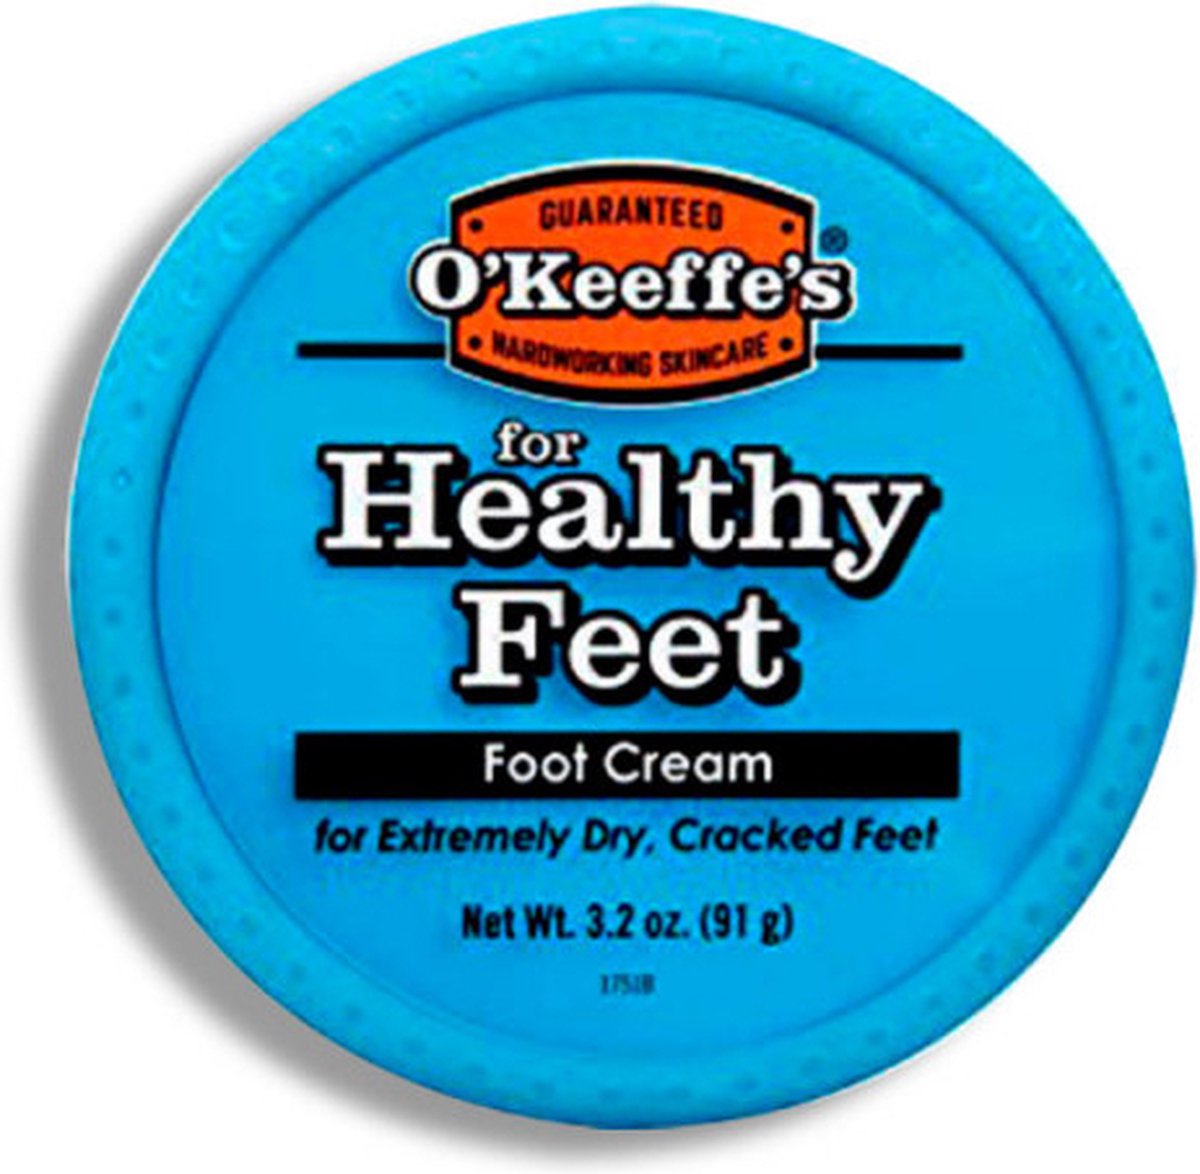 Body Lotion O’Keeffe’s